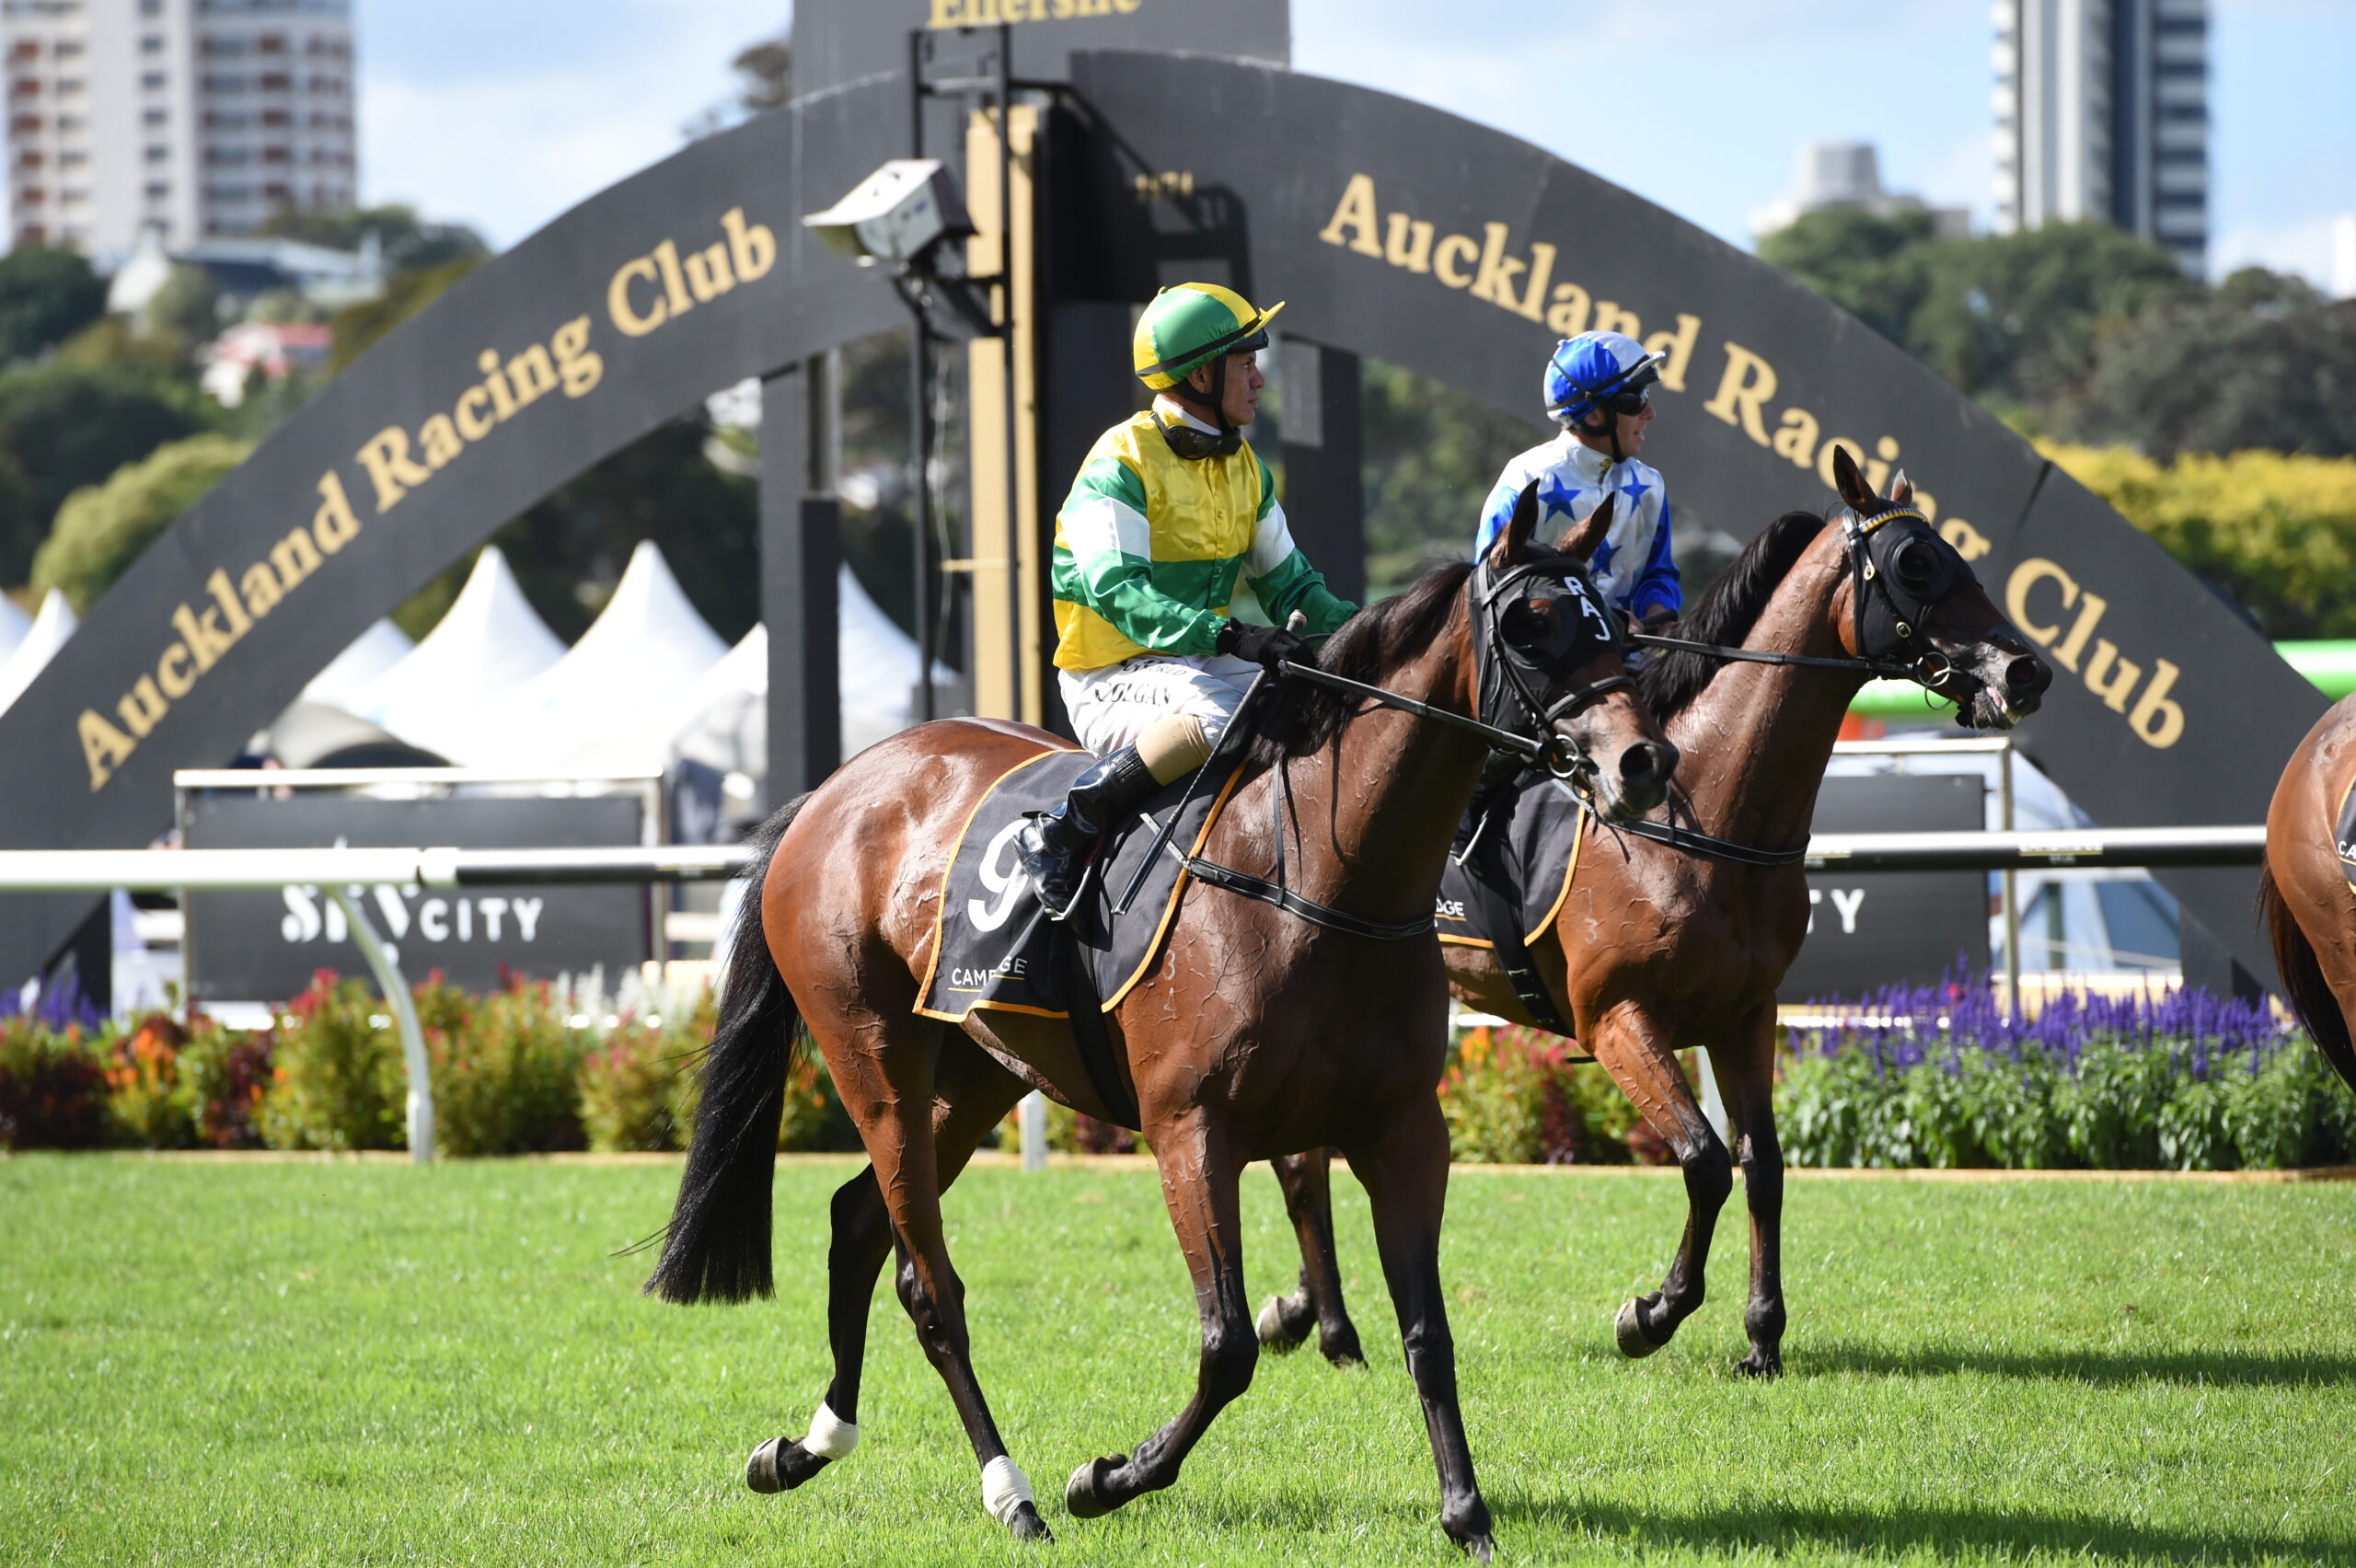 Name change from Auckland Racing Club Incorporated to Auckland Thoroughbred Racing Incorporated